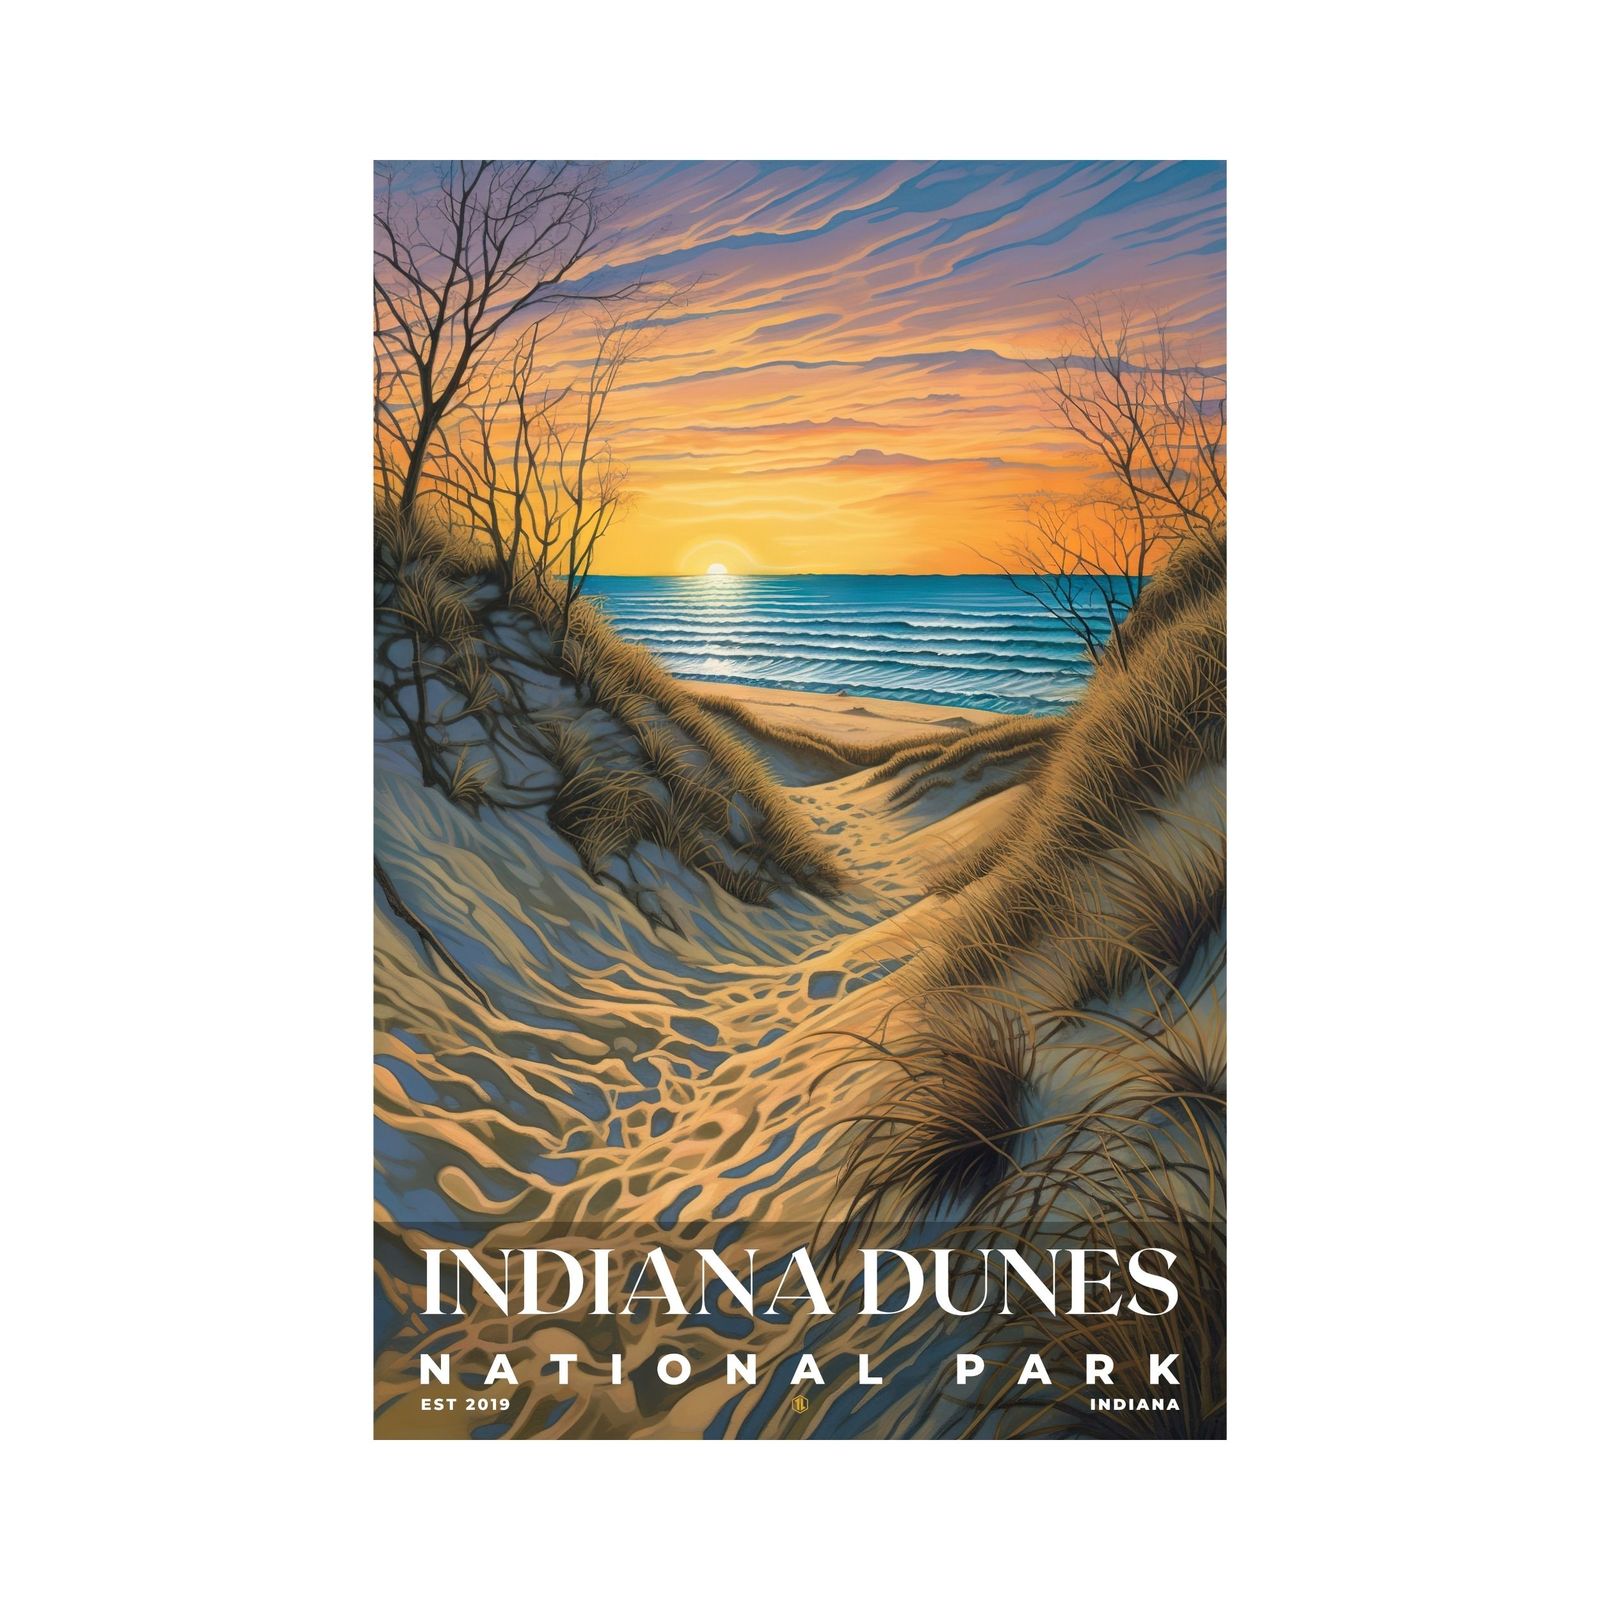 Indiana Dunes National Park Poster | S02 - $33.00 - $147.20